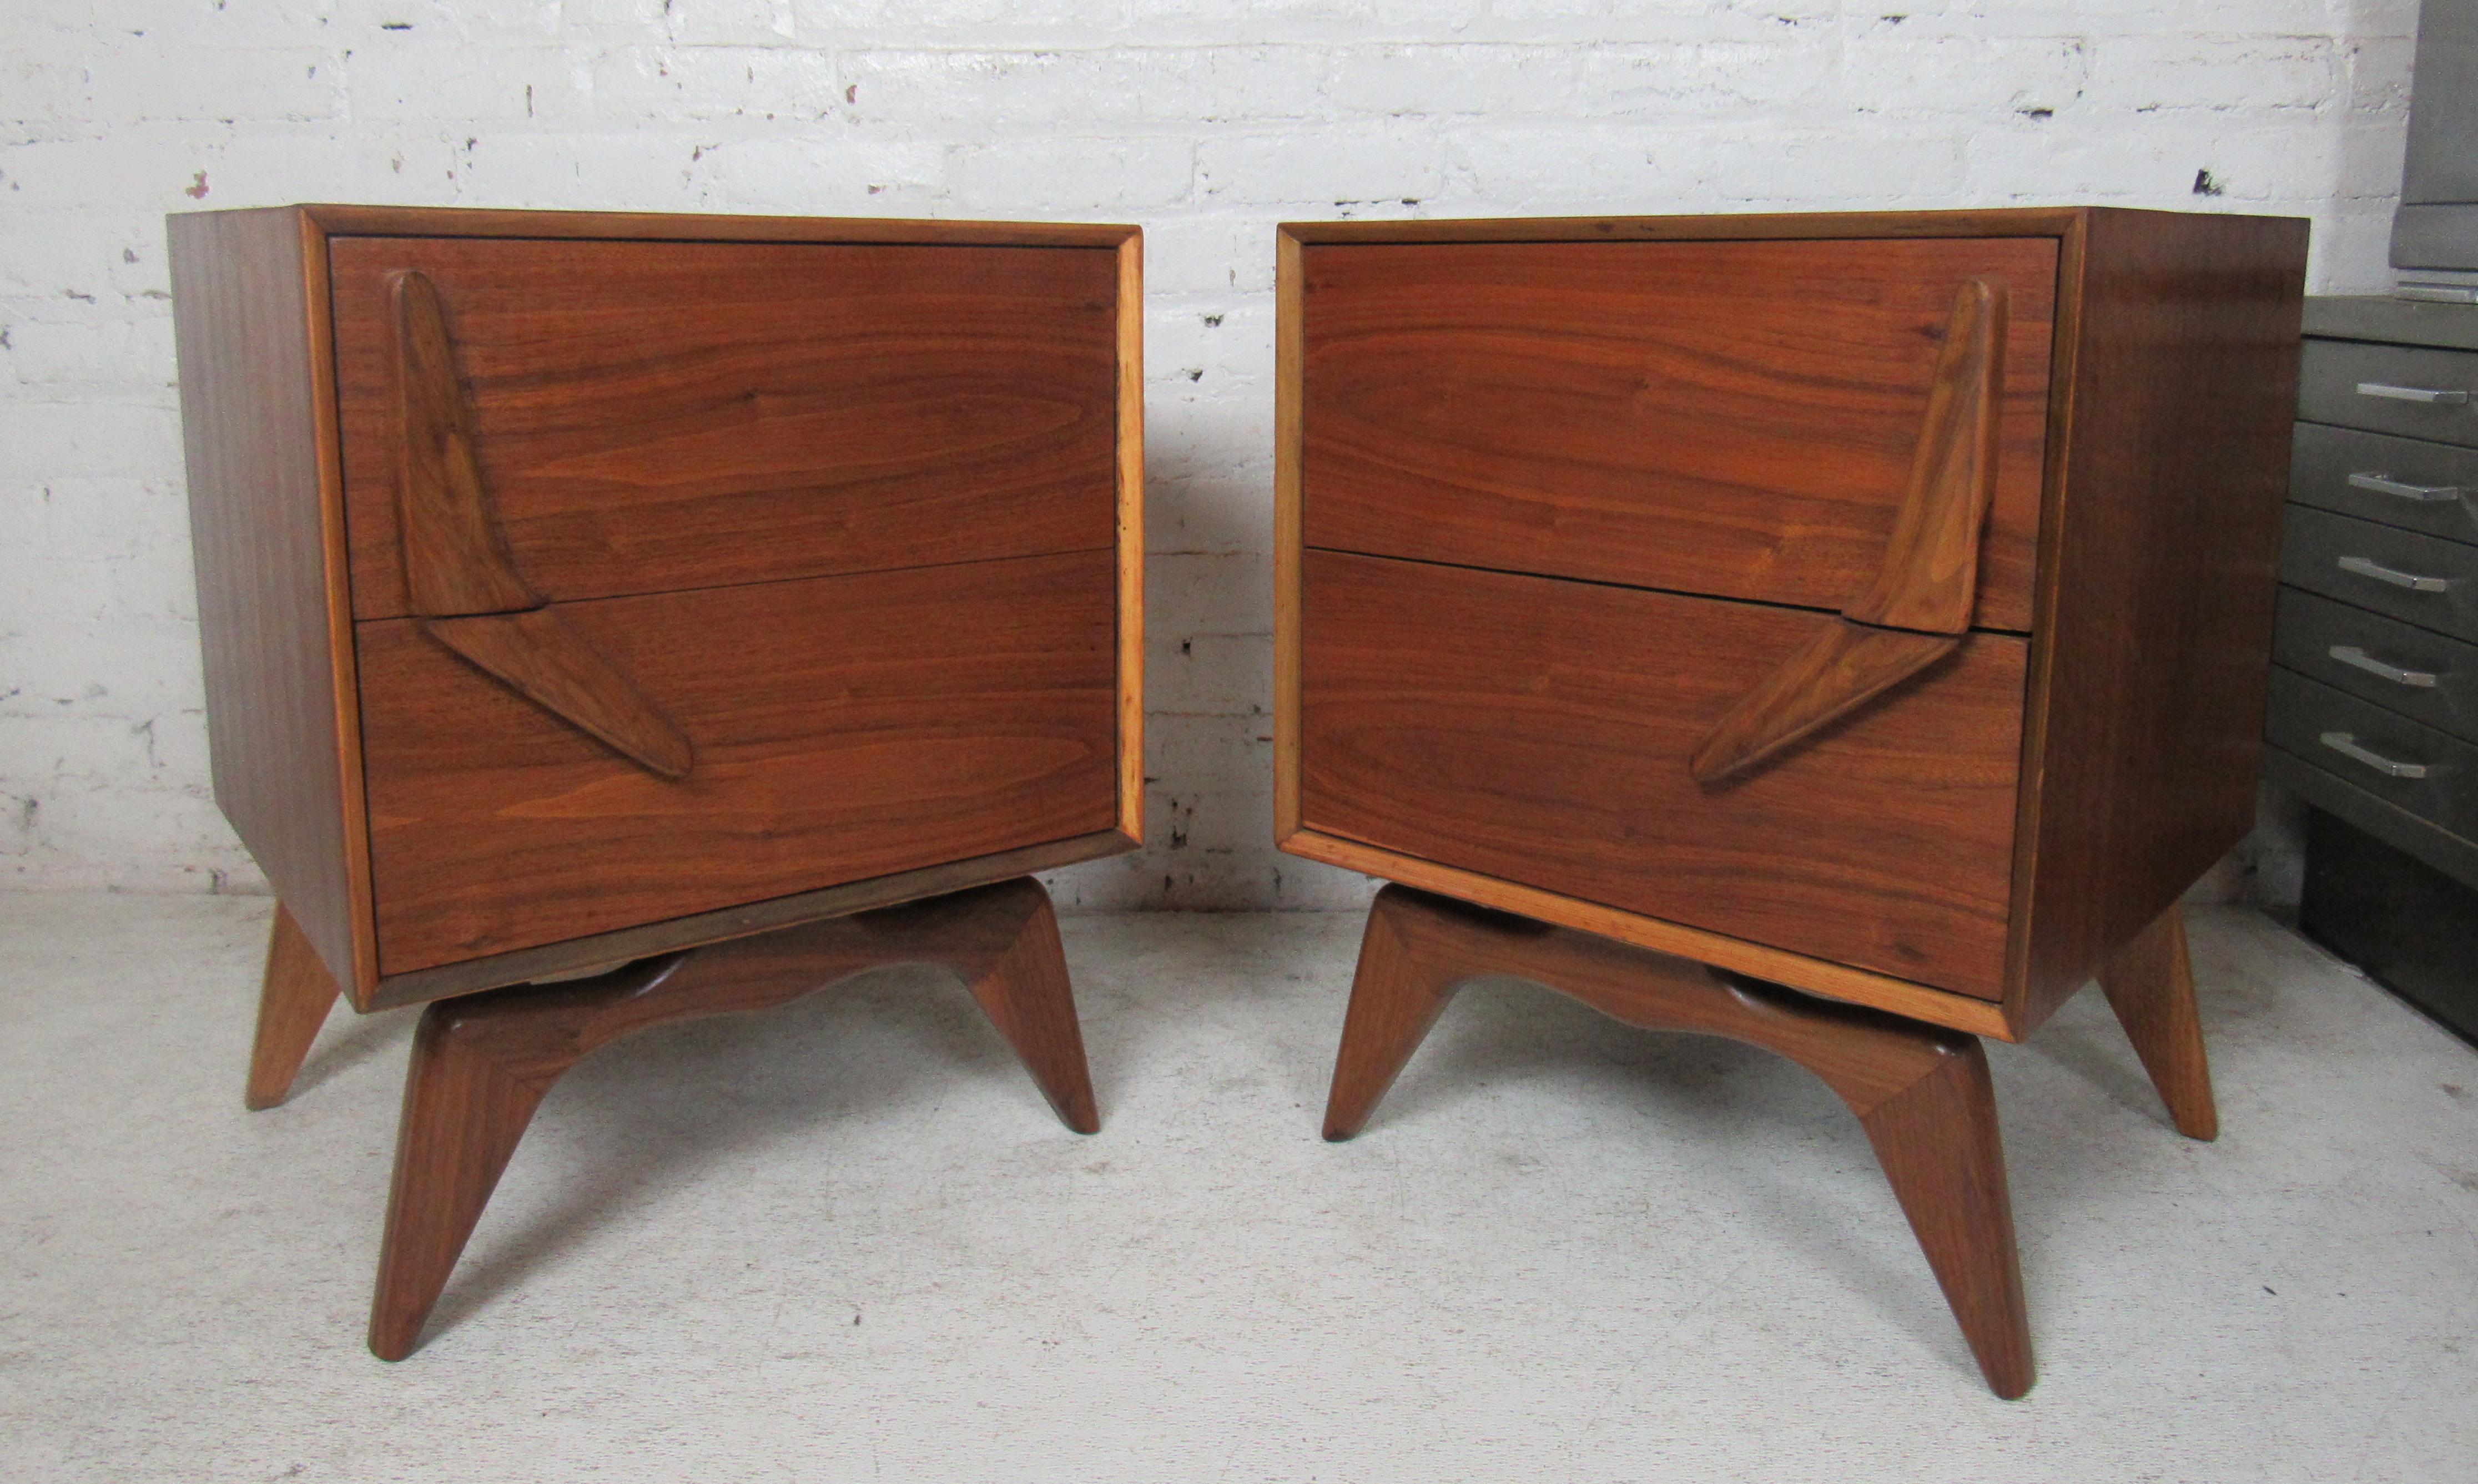 Pair of vintage modern nightstands featured in rich walnut grain. Two spacious drawers with sculpted handles.

Please confirm item location with dealer (NJ or NY).